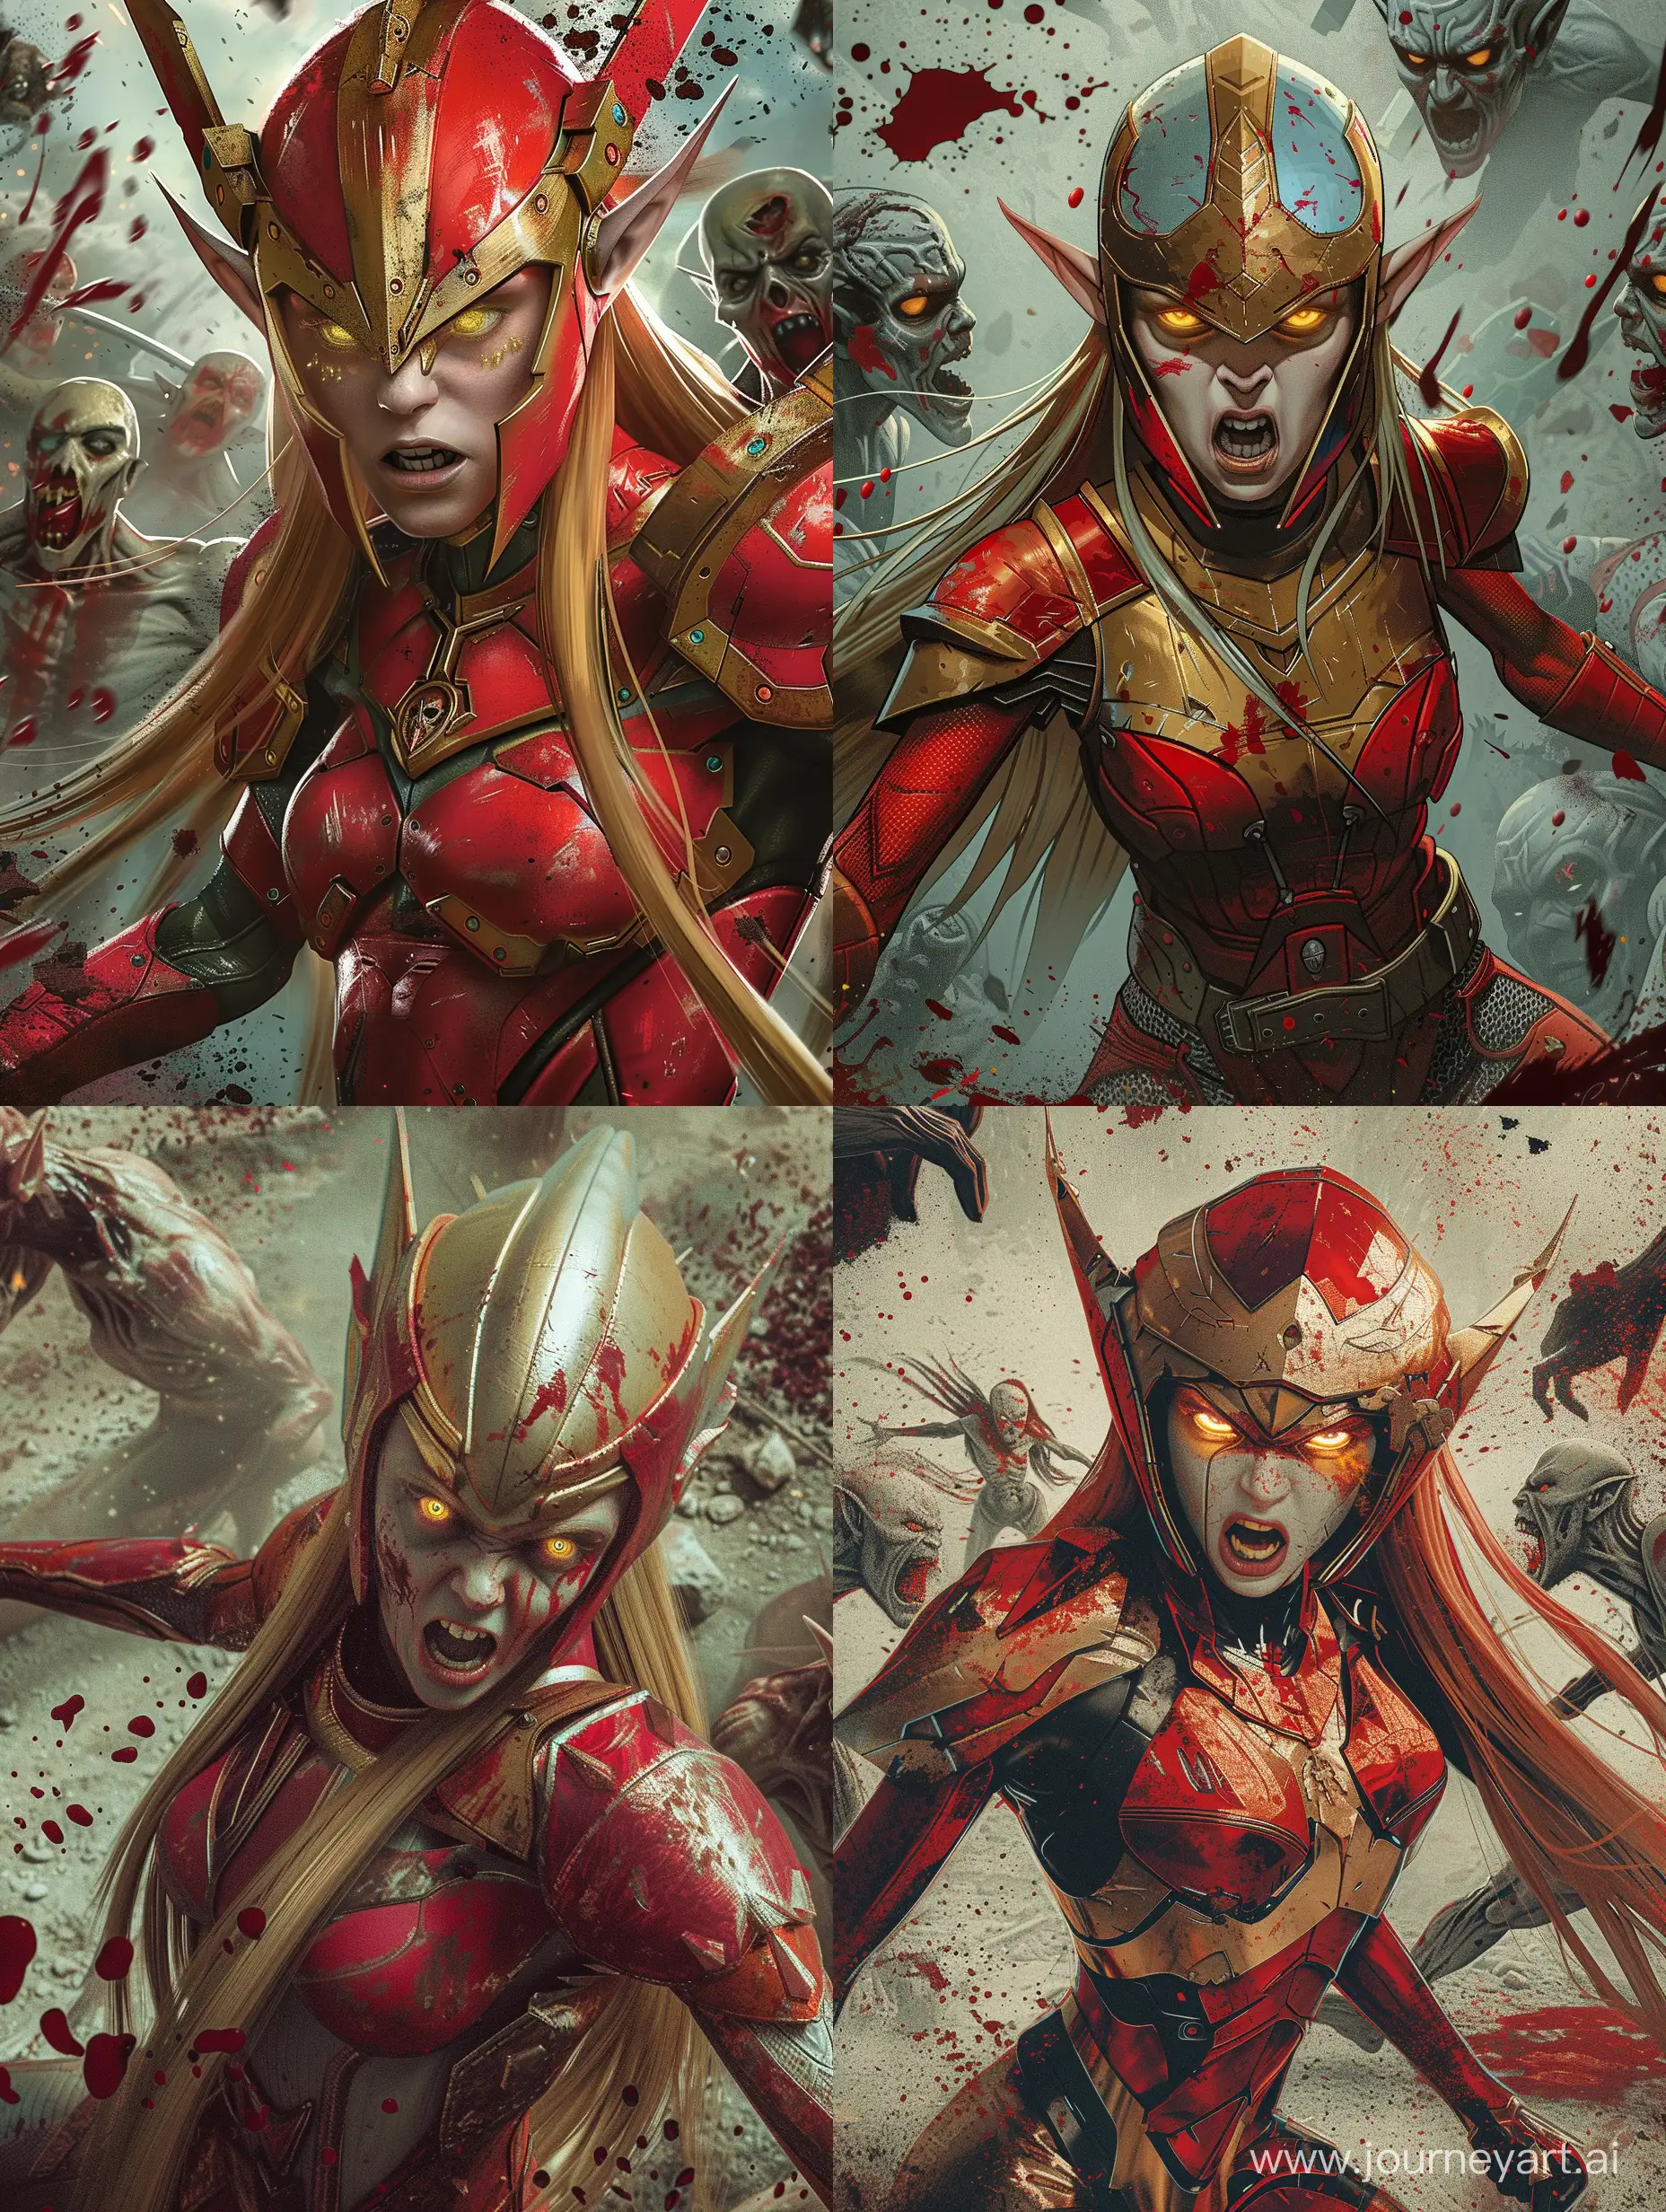 A beautiful elf woman in red and gold armor, long straight holographic hair, almond-shaped golden eyes, anger on her face, a helmet that does not hide her face, fights alone on the battlefield with an army of scary zombies, blood splashes, dirt, high detail dark symbolism, dark white and red, pixelated realism, detailed character expressions, dark cyan and red, fairycore,